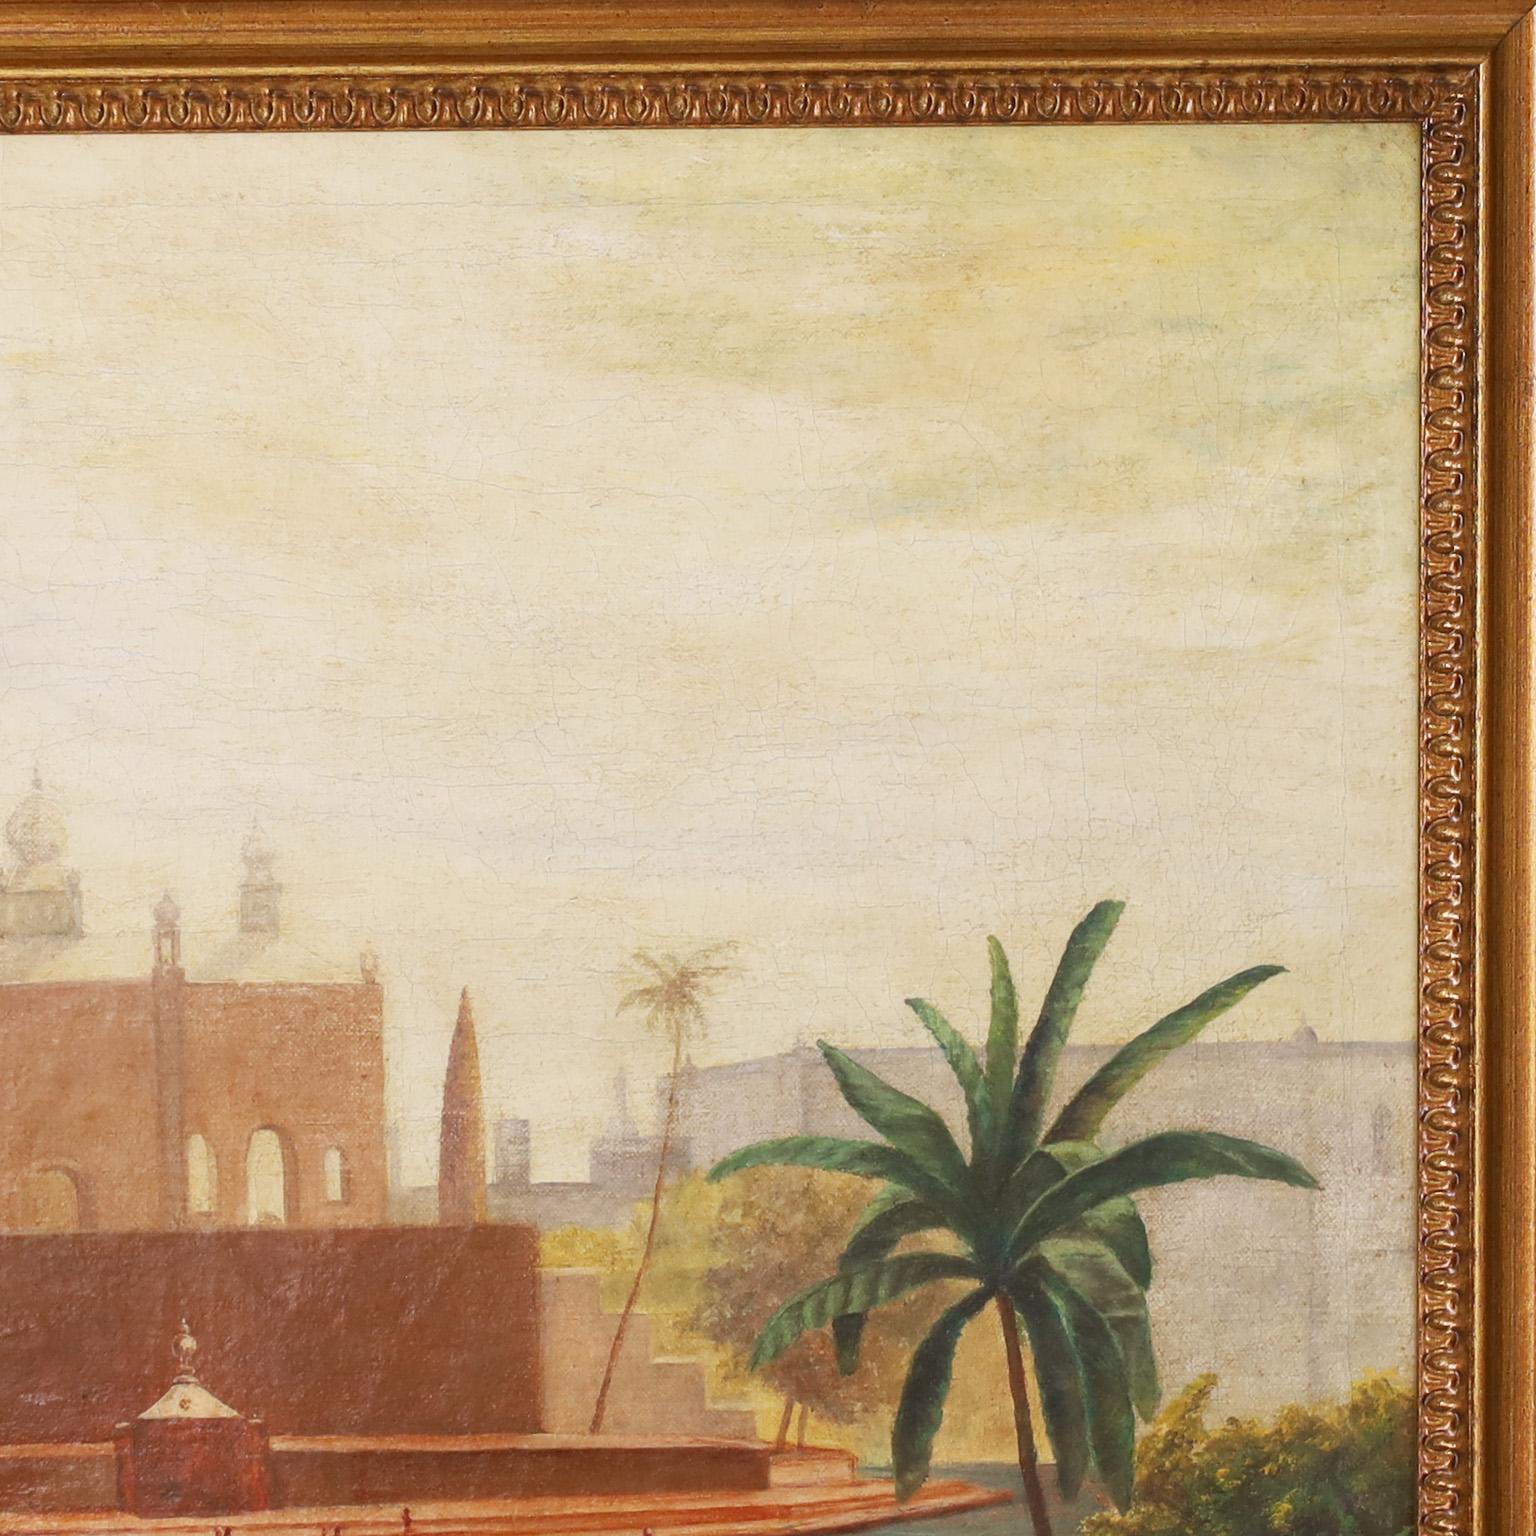 Hand-Painted Antique British Colonial Oil Painting on Canvas of an Indian Palace